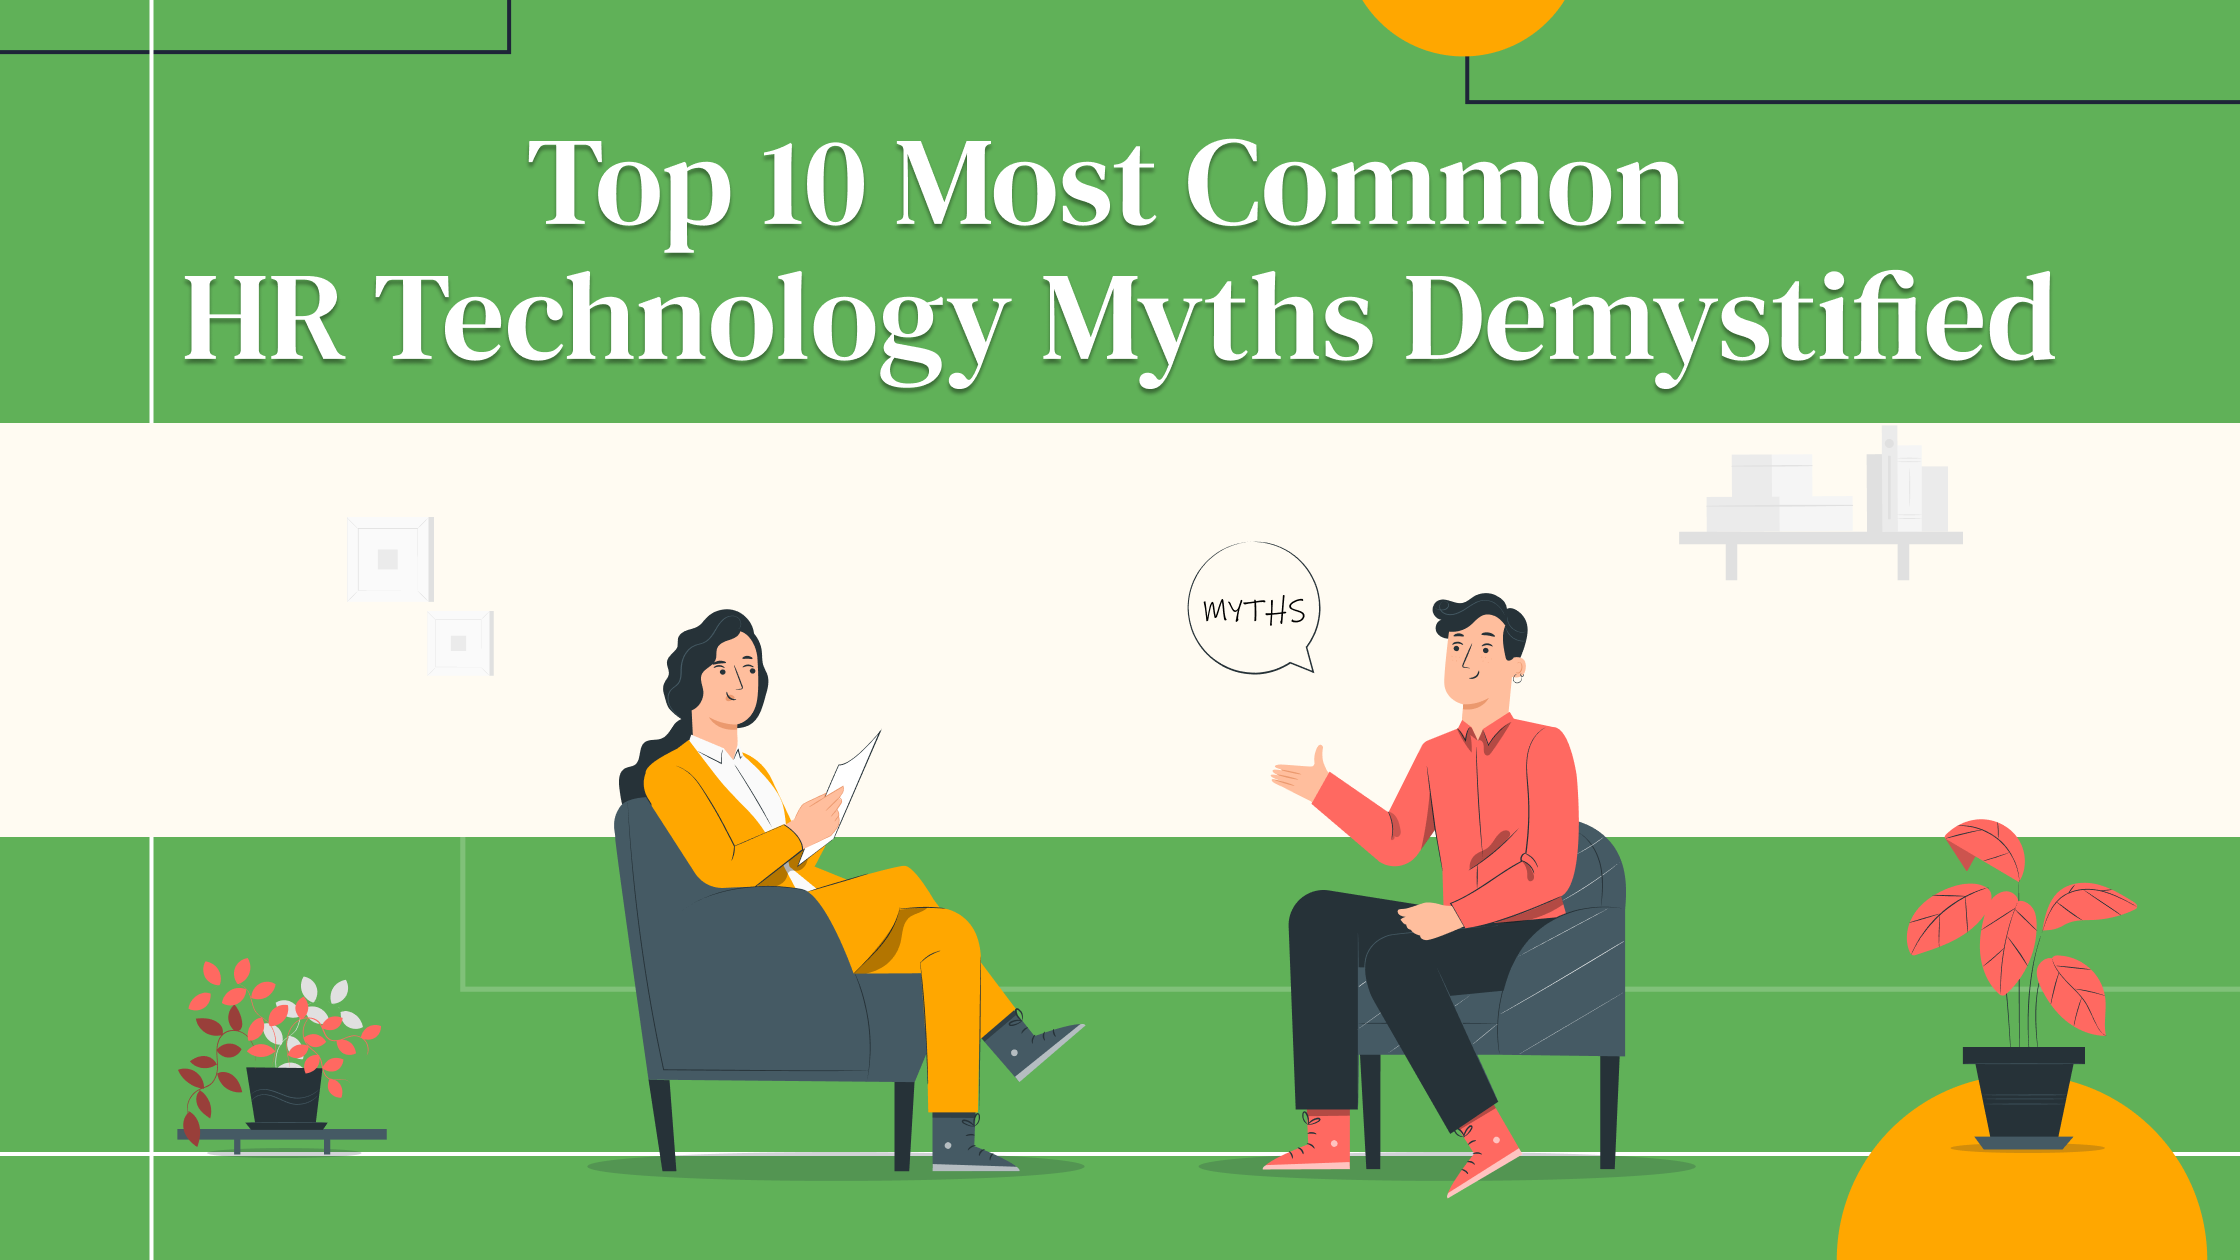 Top 10 Most Common HR Technology Myths Demystified